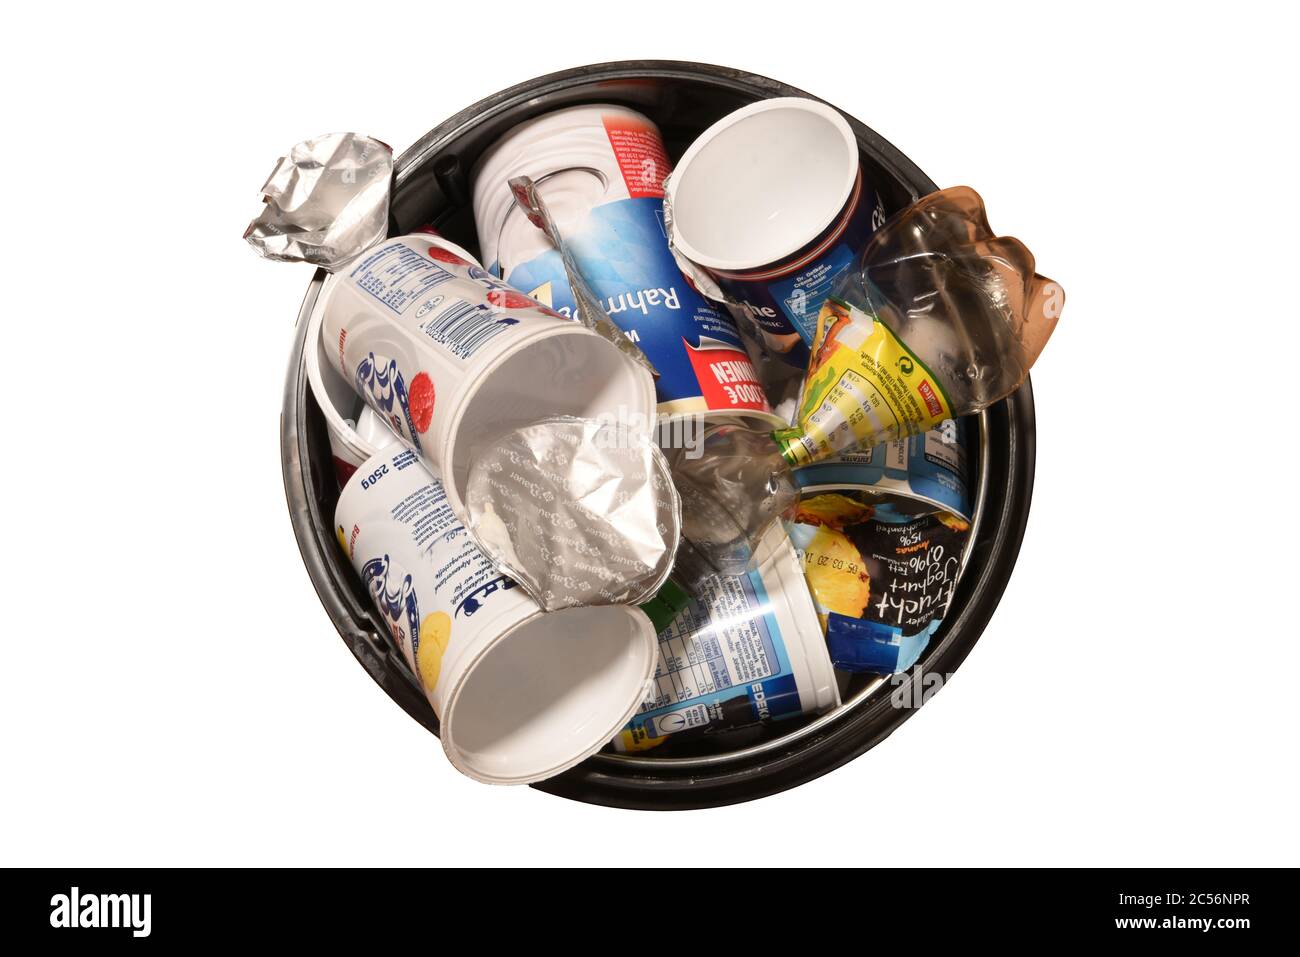 Waste, plastic waste, plastic cups, plastic containers, plastic bottles, trash cans Stock Photo